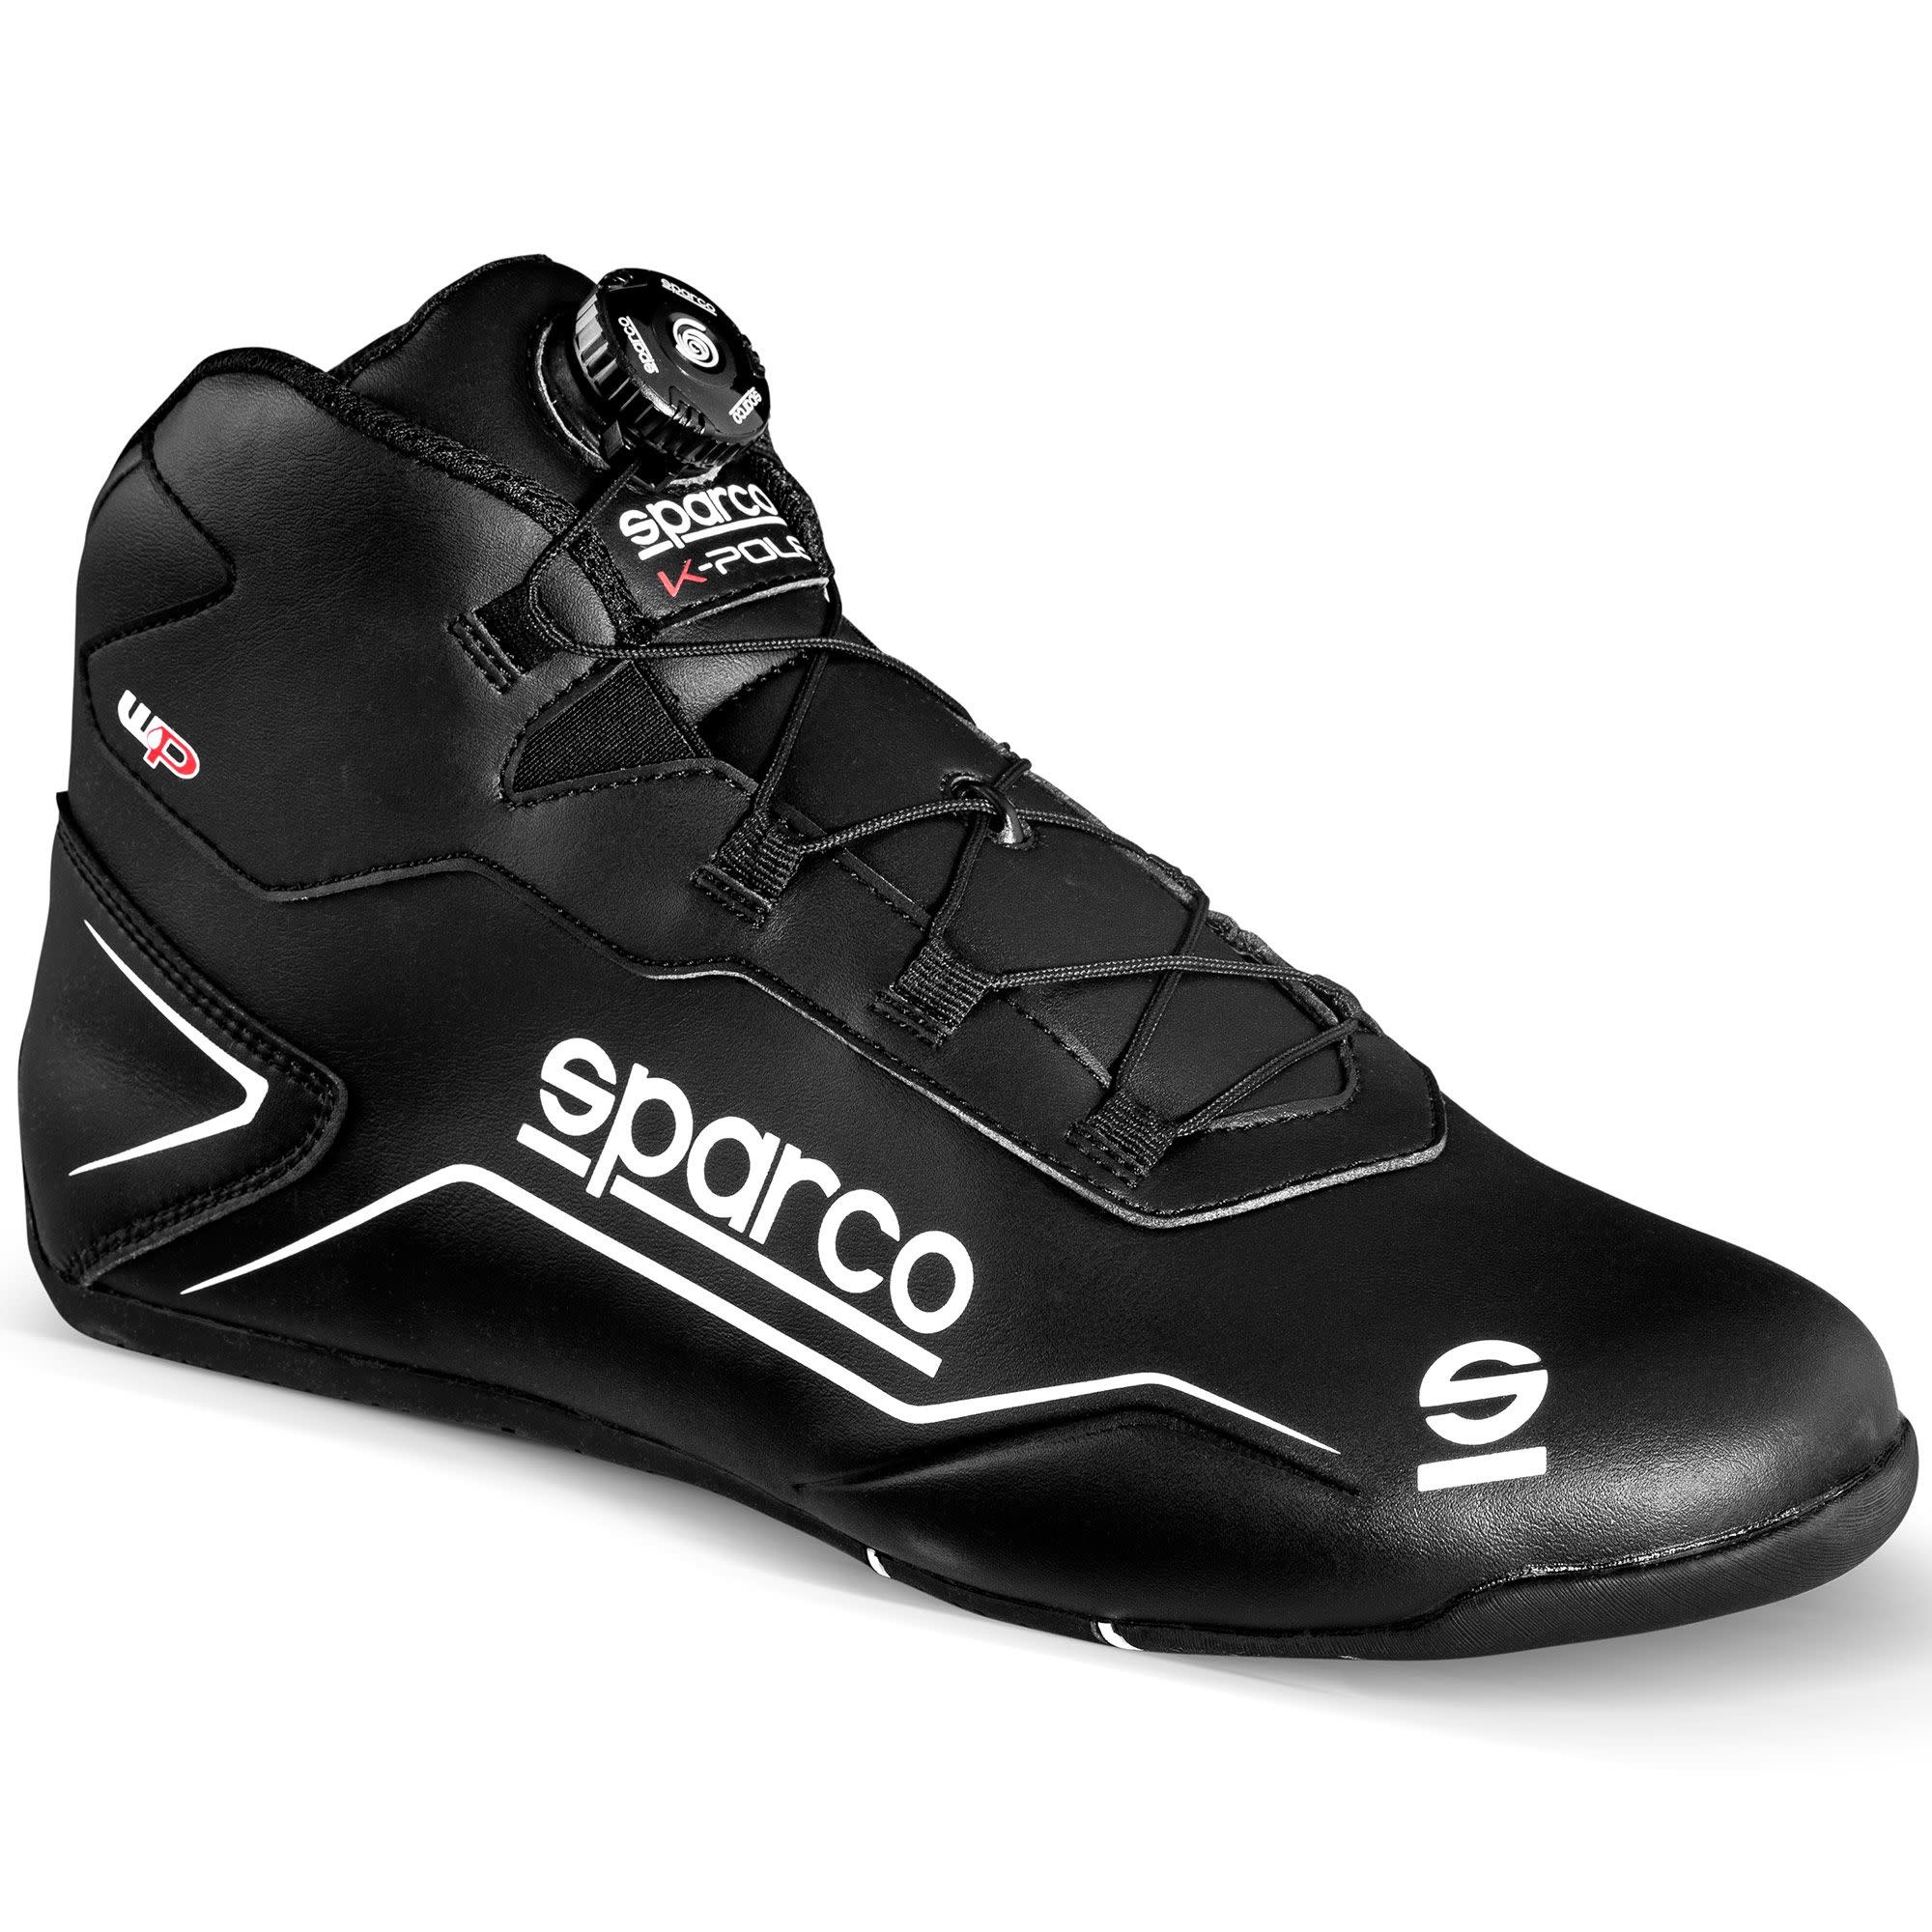 Sparco K-Pole water proof schoes Schwarz